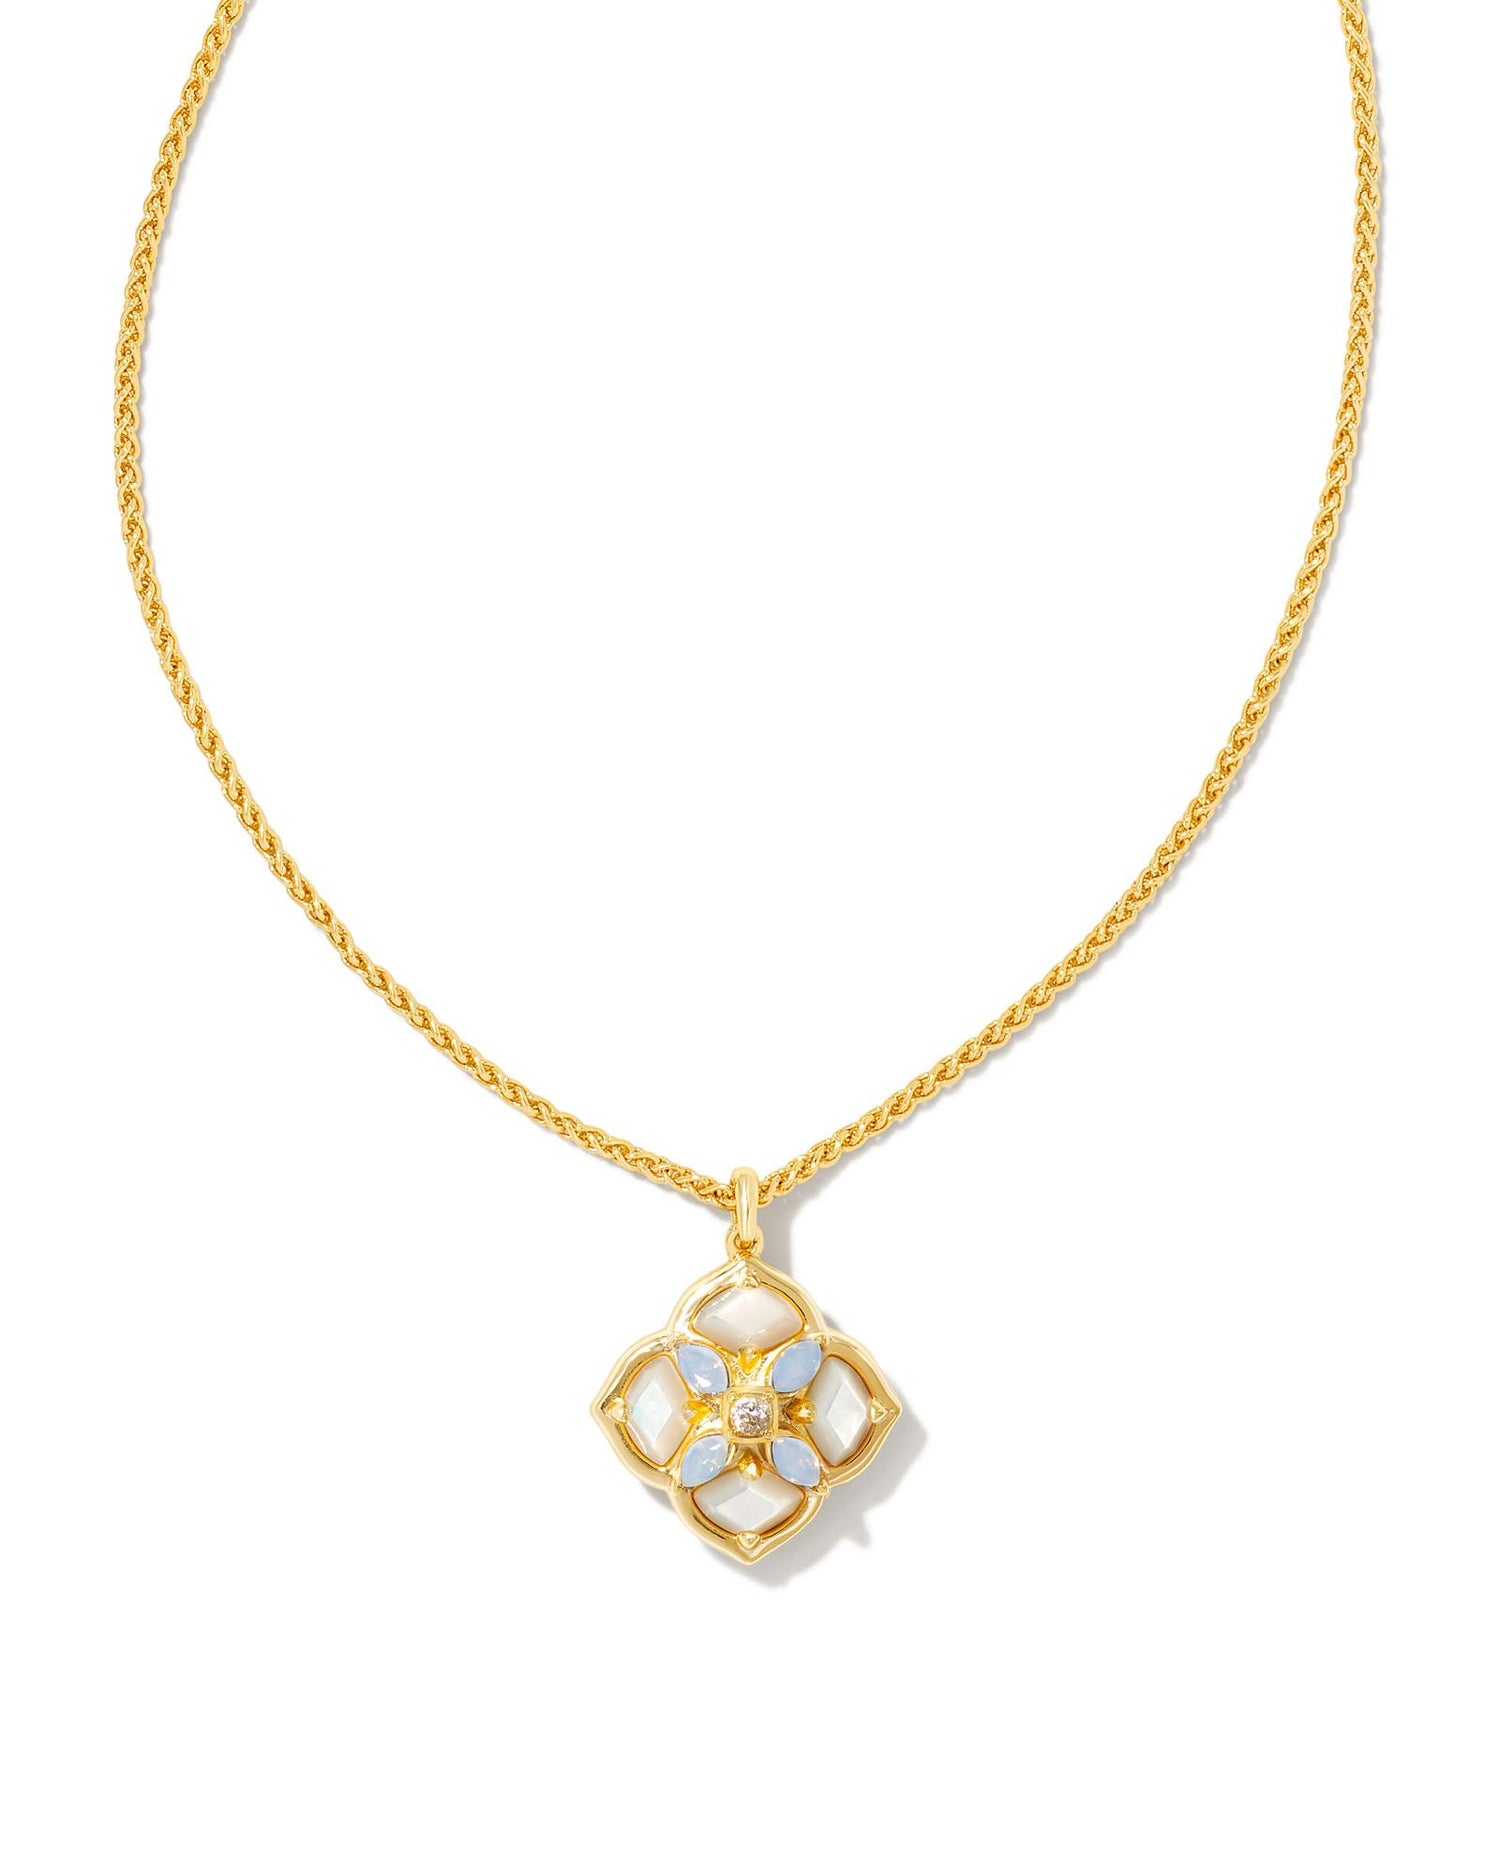 Our signature logo meets gorgeous stone detailing for the first time in the Dira Stone Gold Short Pendant Necklace. Featuring custom-cut stones and gems assembled into our logo shape, this pendant is bound to be a new favorite in your collection. The metal is 24k gold plated over brass with white stones. 